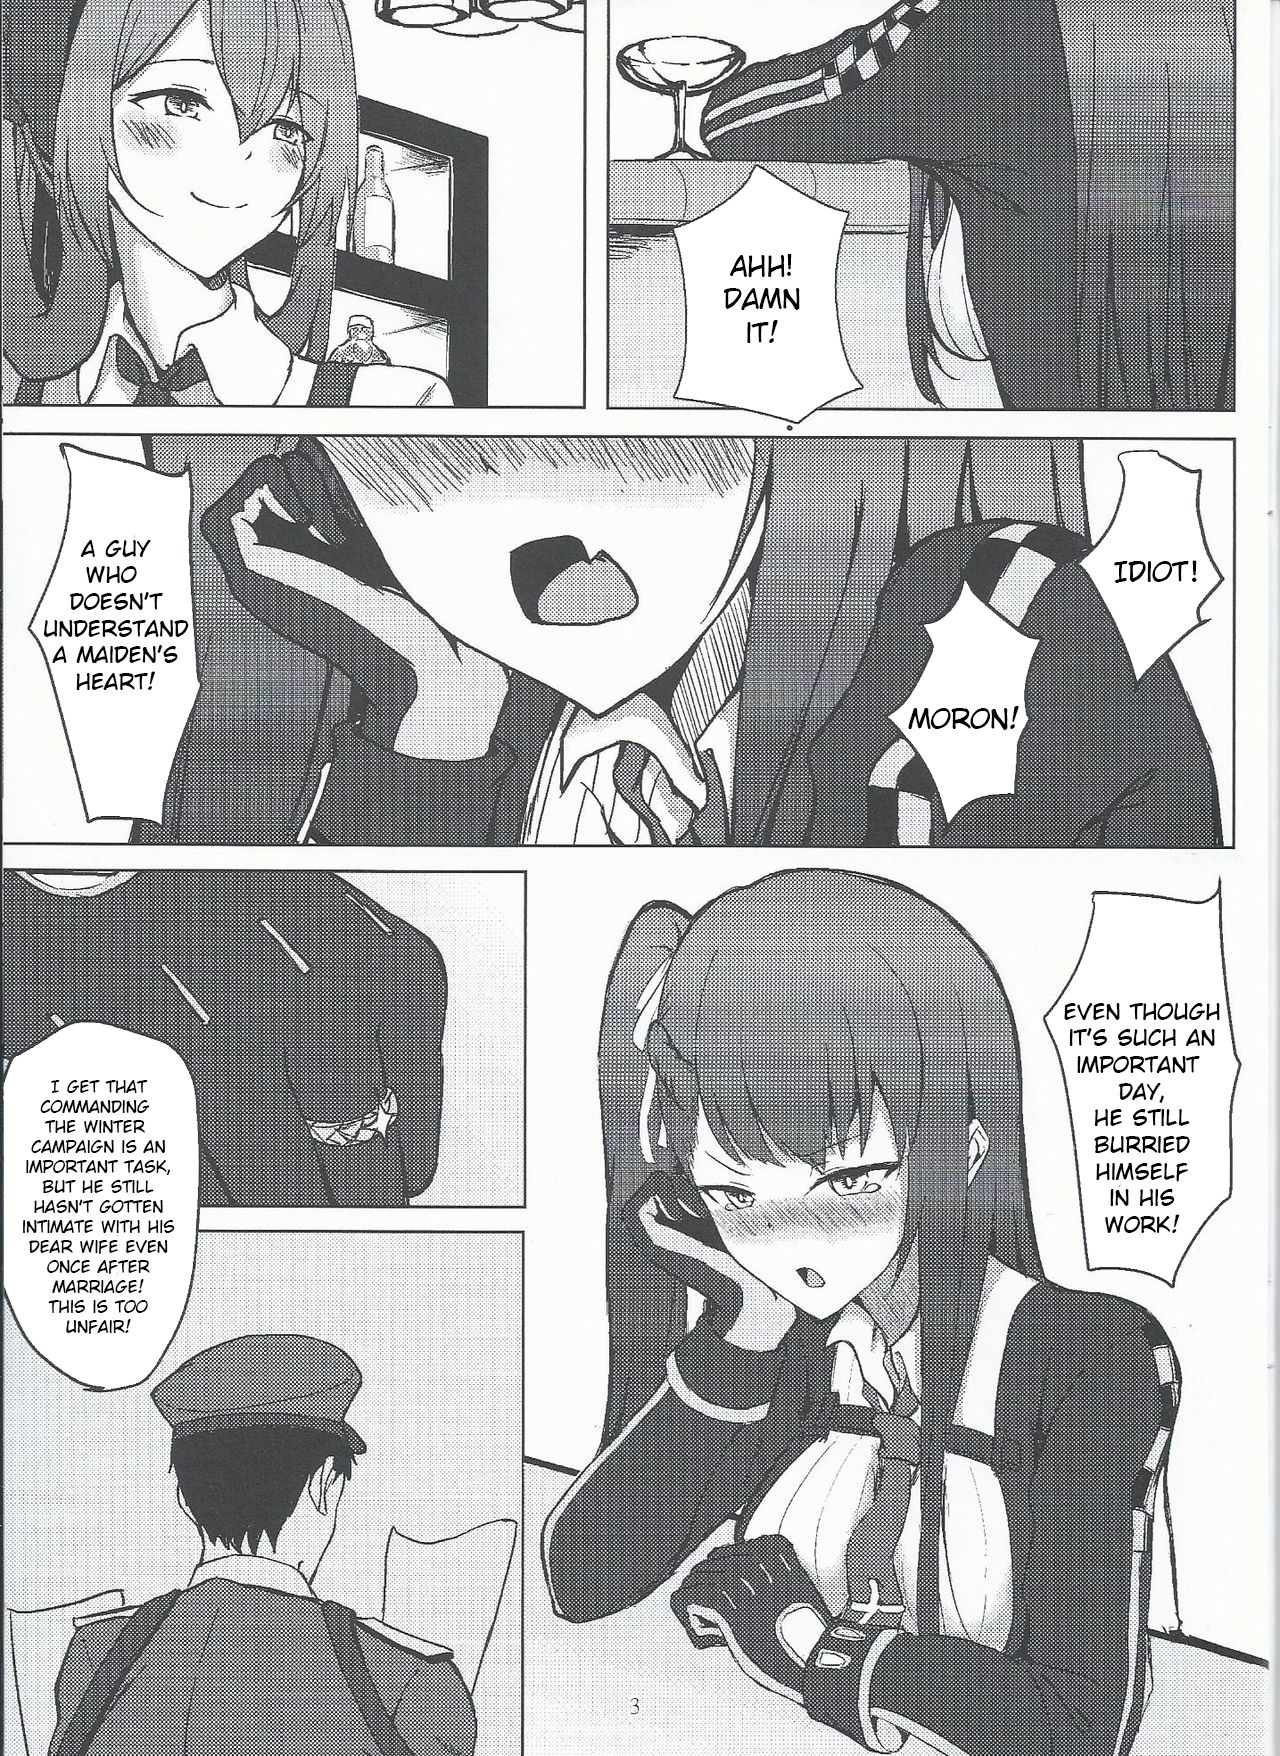 (FF32) [Sumi (九曜)] I don't know what to title this book, but anyway it's about WA2000 (Girls Frontline) [English] page 2 full